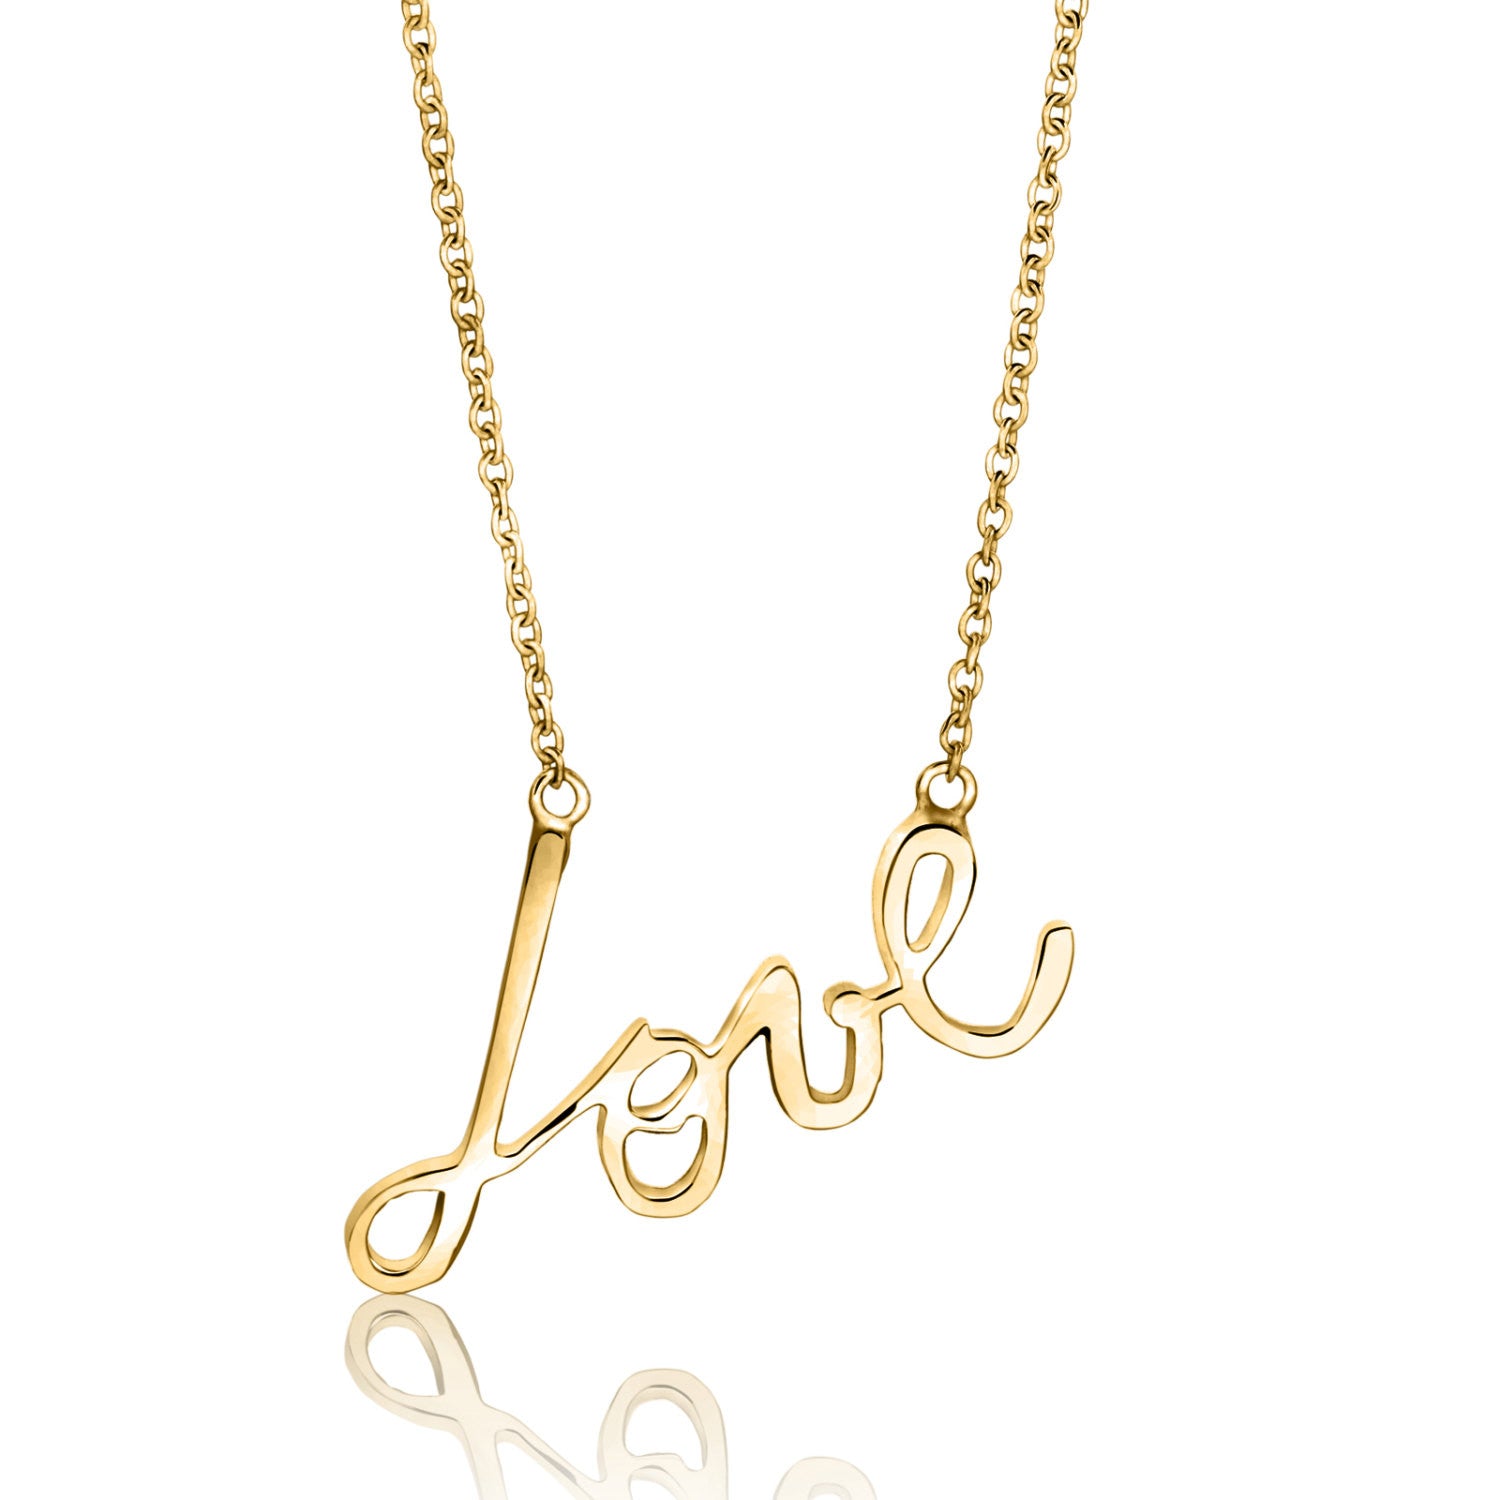 Lavin script love necklace, necklace, jewelry, valentines day, mothers day gift idea, wedding gift idea, bridesmaid gift 